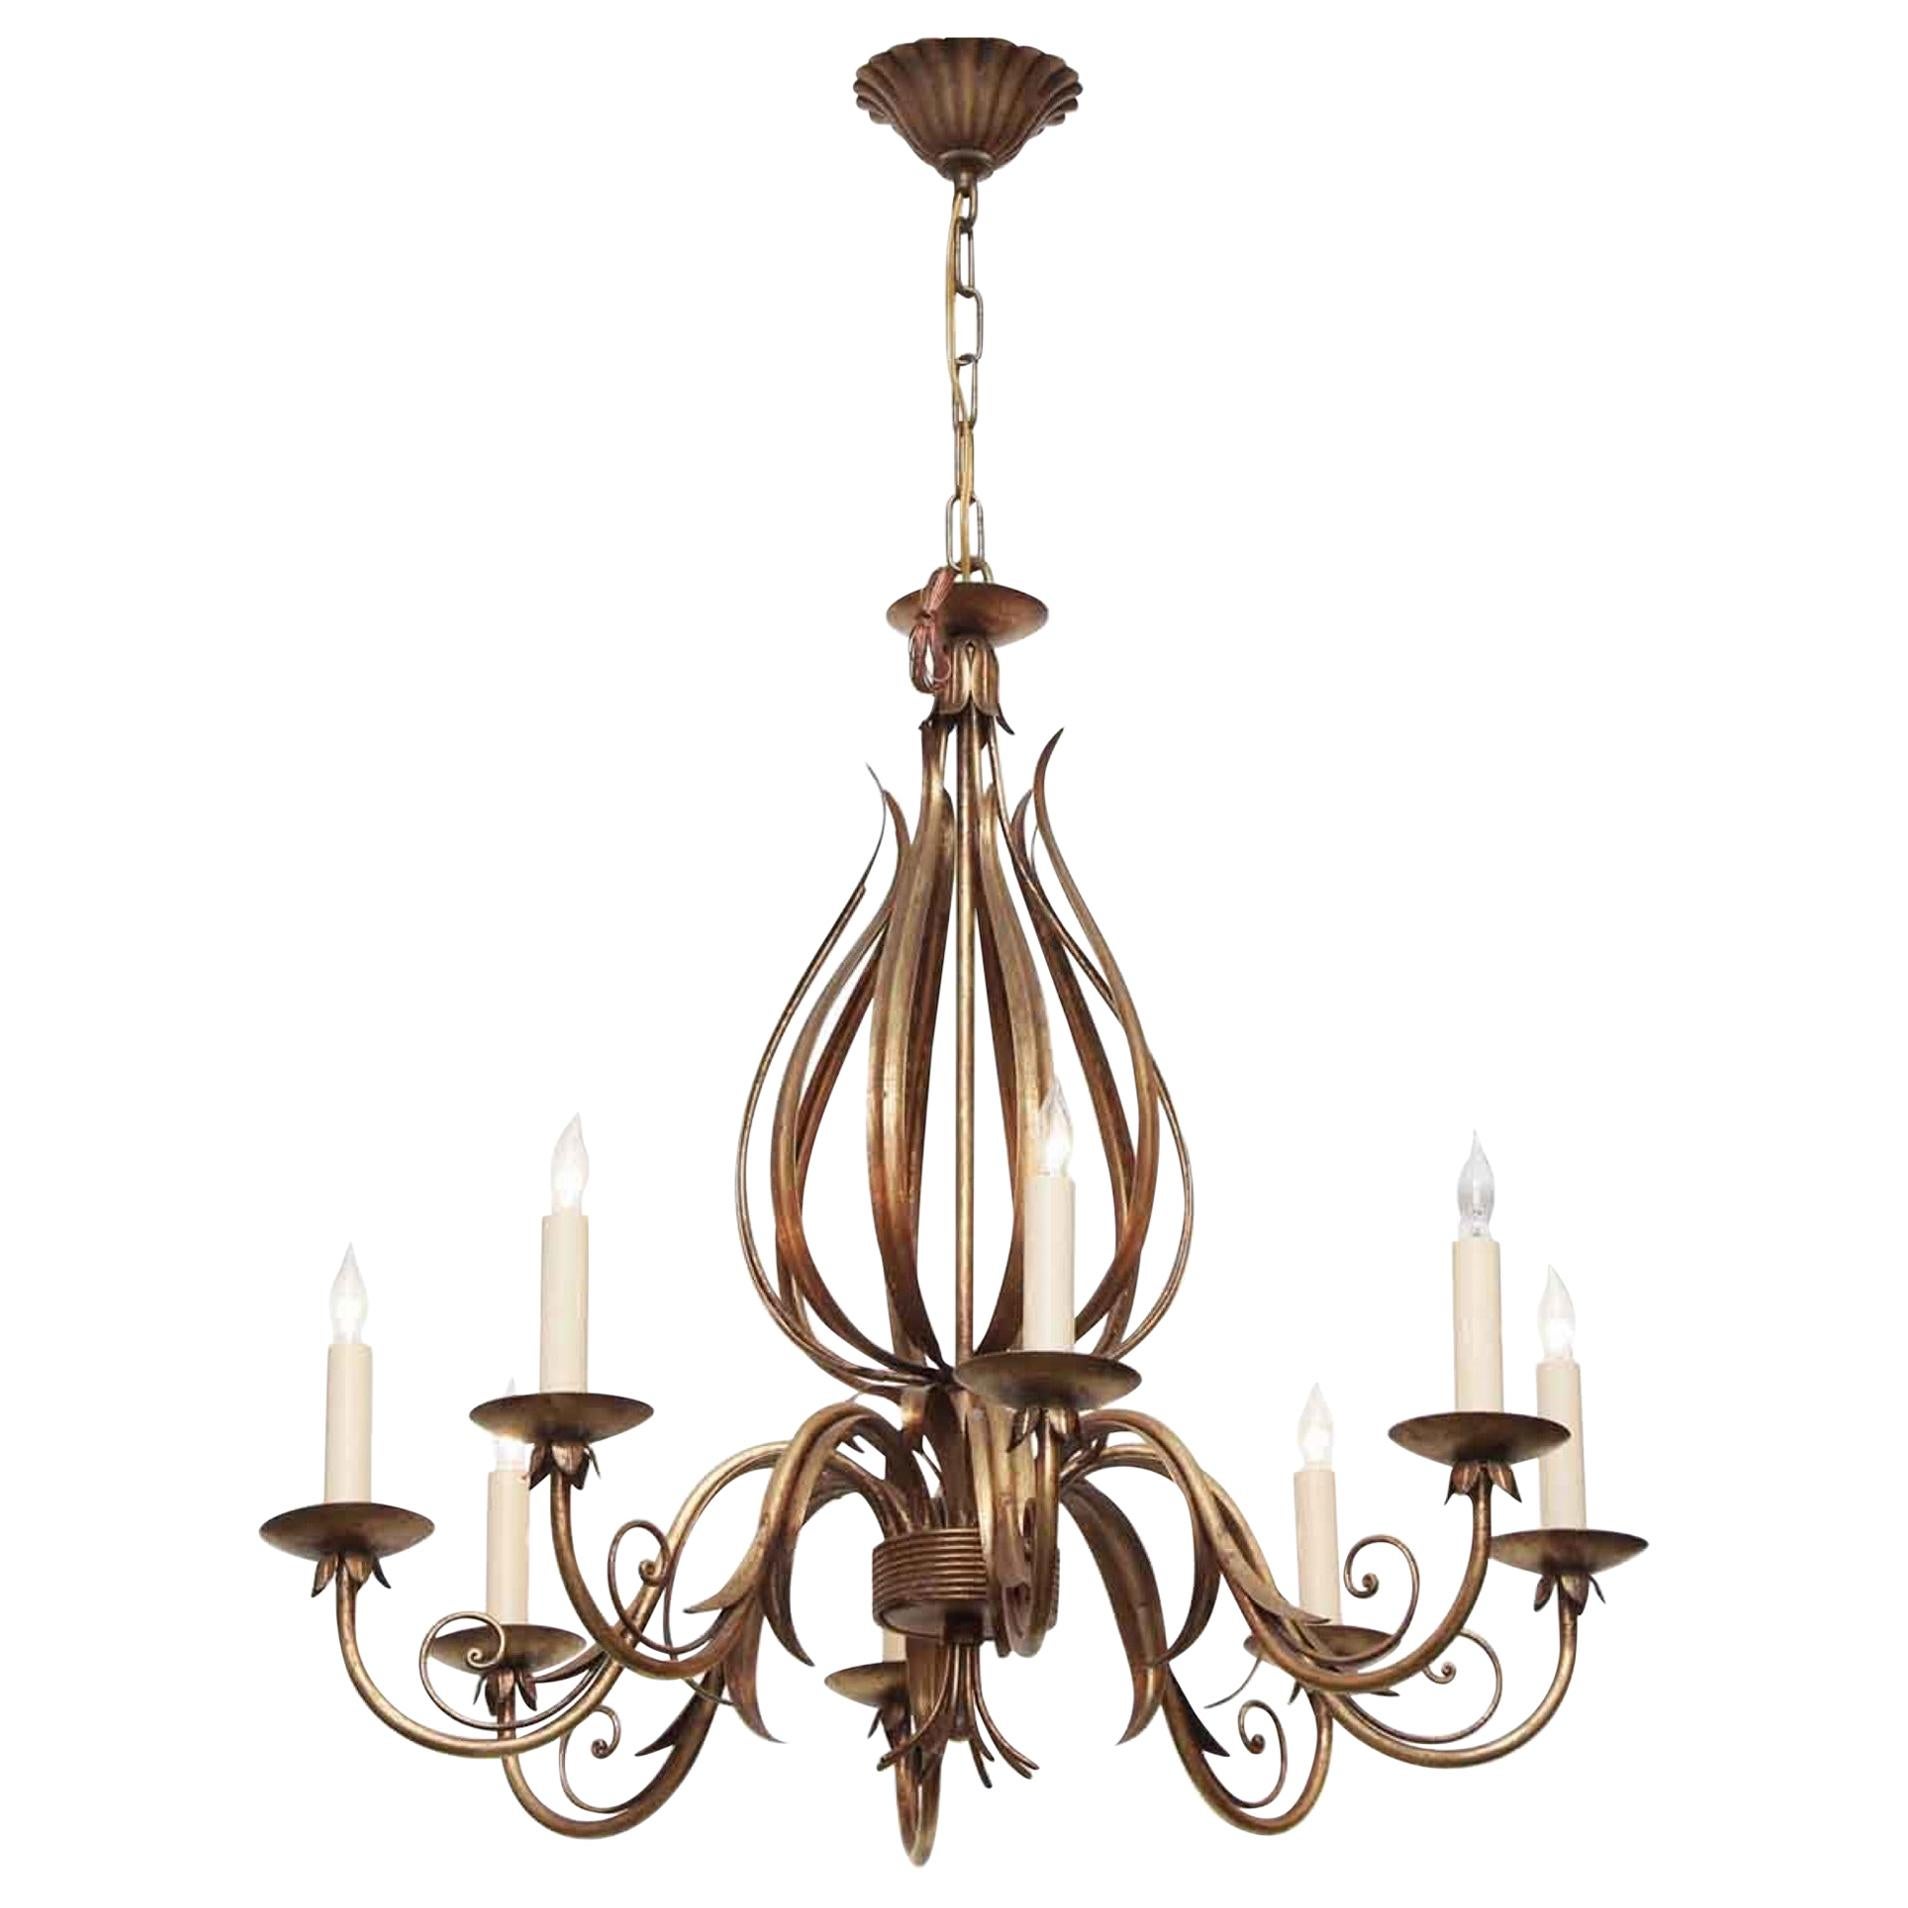 2000s Florentine Style 8-Arm Chandelier with Articulated and Wrought Iron Leaves